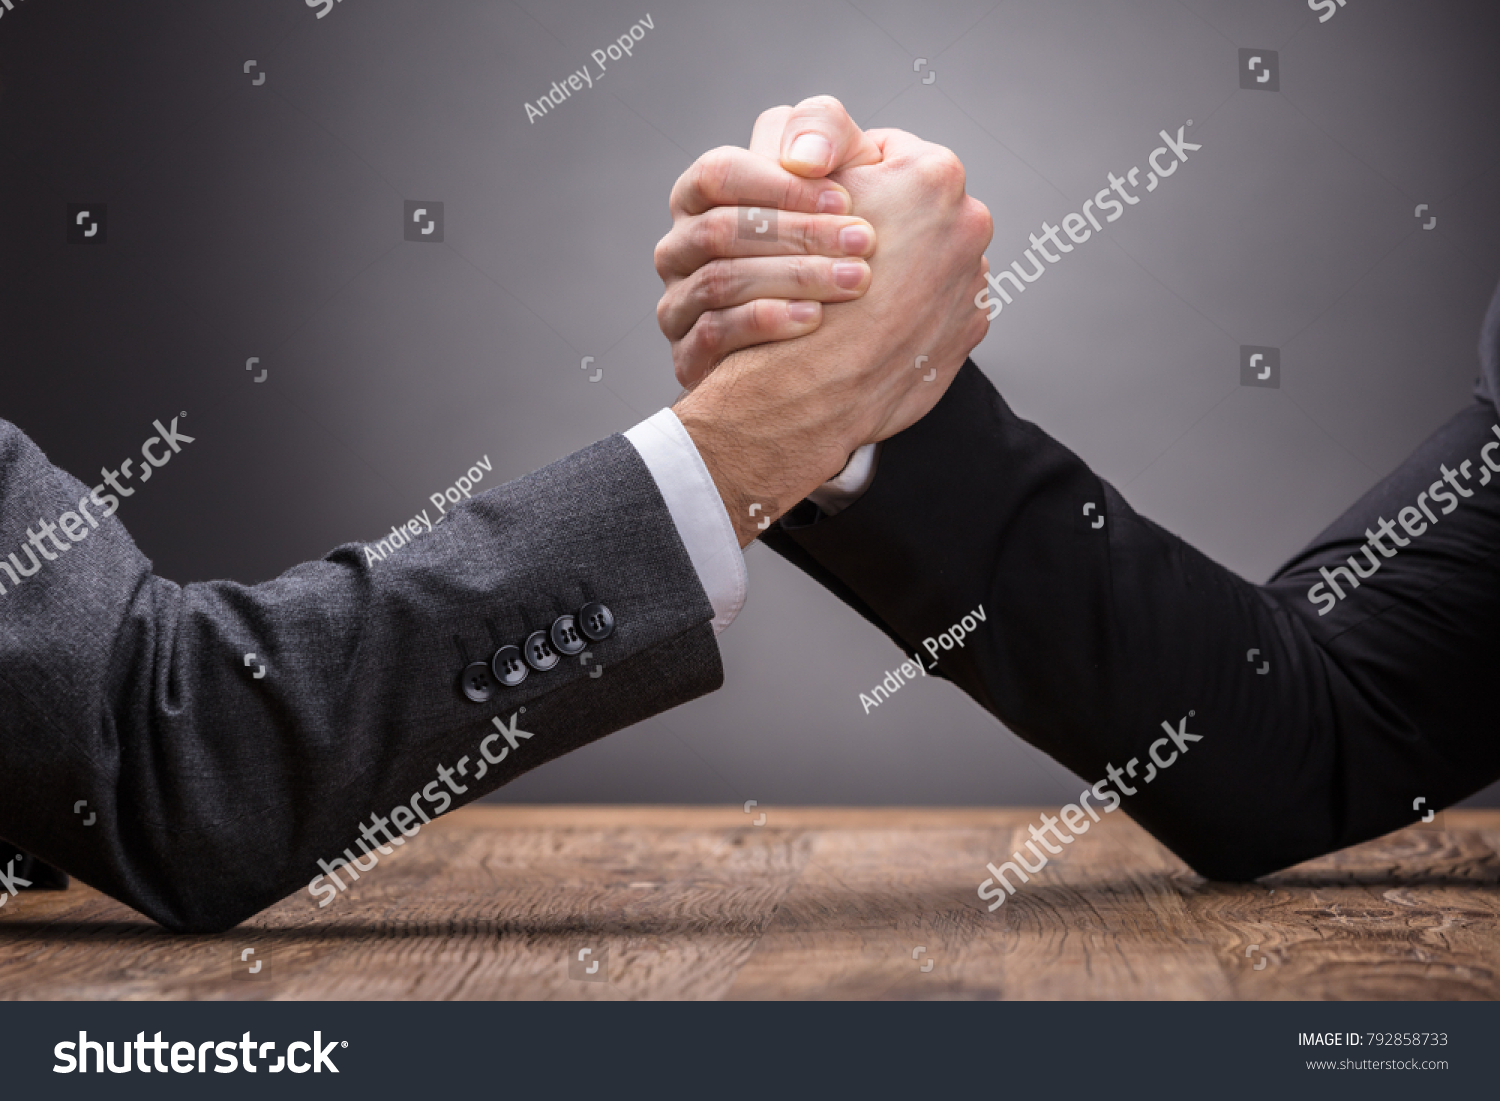 Close-up Of Two Businesspeople Competing In Arm Wrestling On Grey Background #792858733